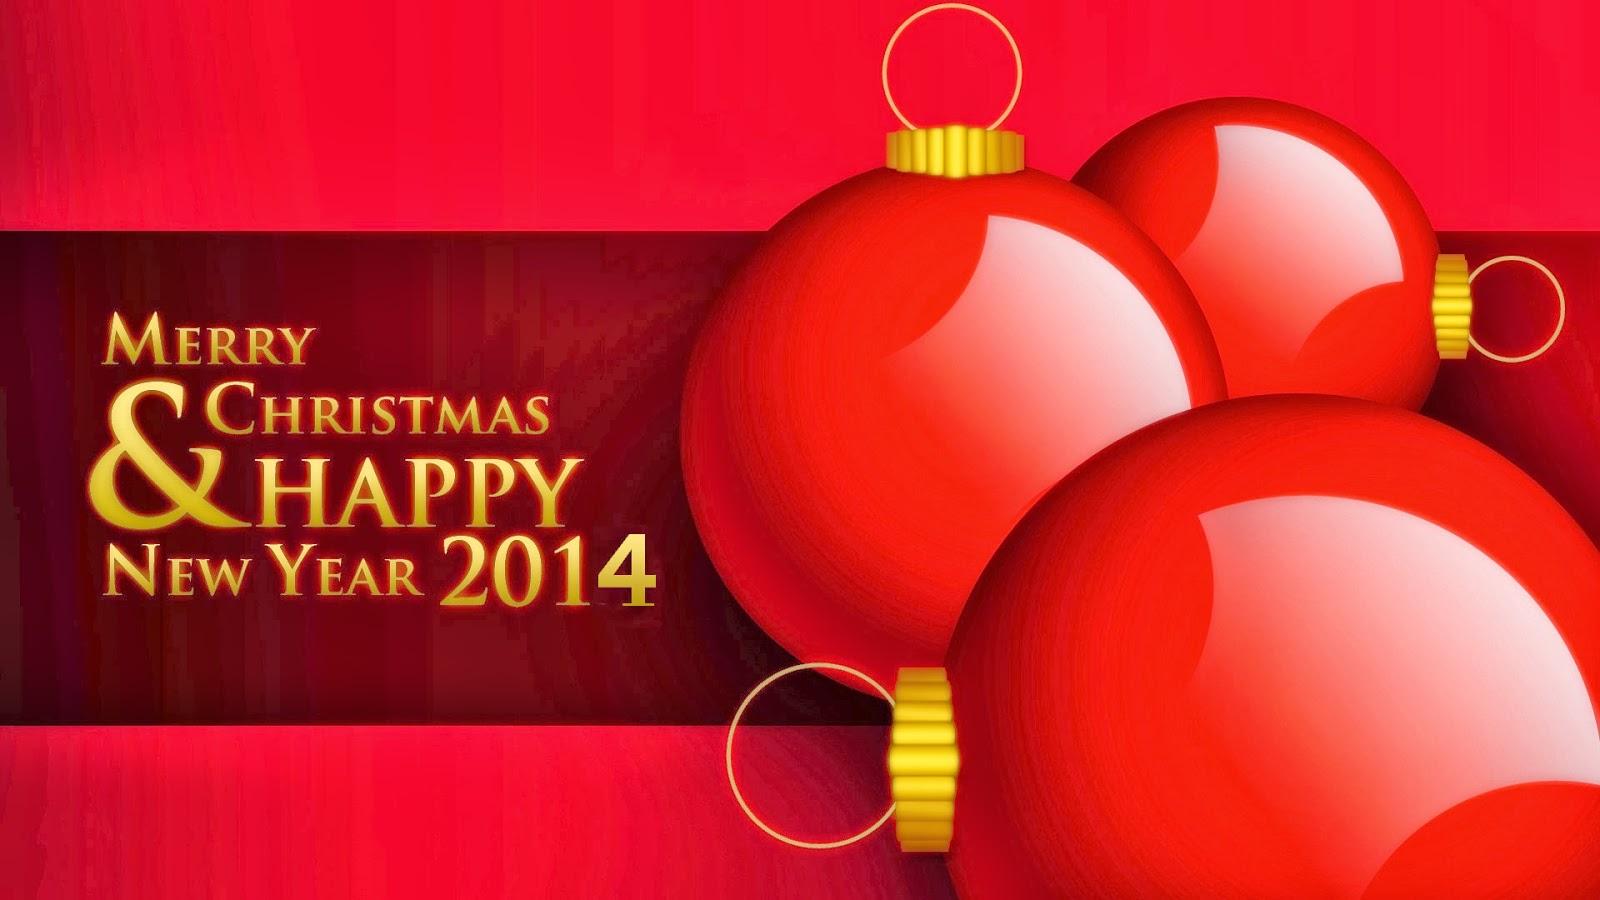 Best New Year 2014 HD Wallpapers for Desktop Screen - New Year